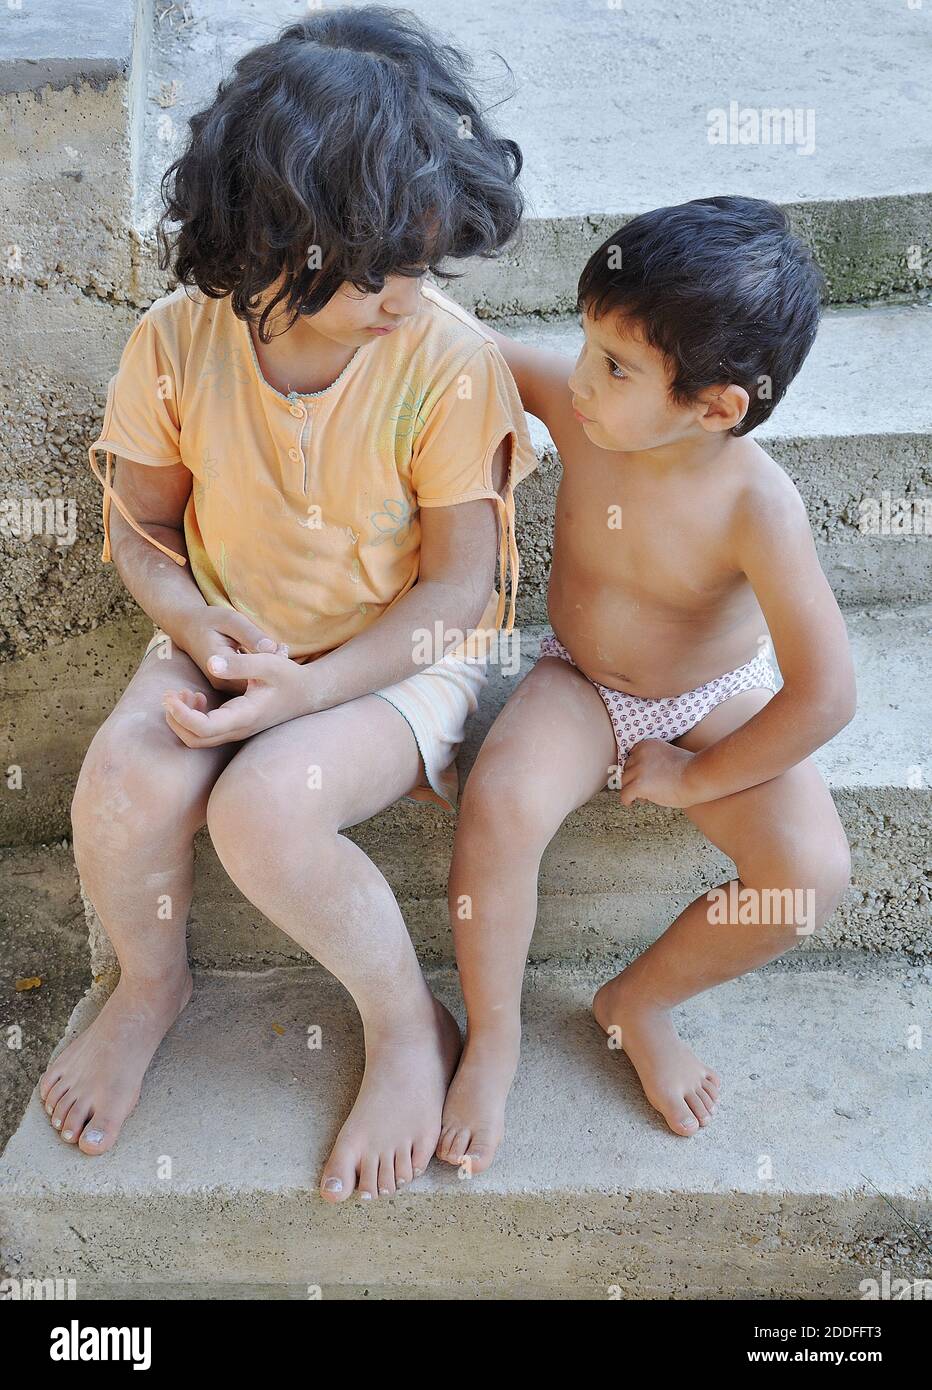 Poverty and poorness on the expression of children Stock Photo